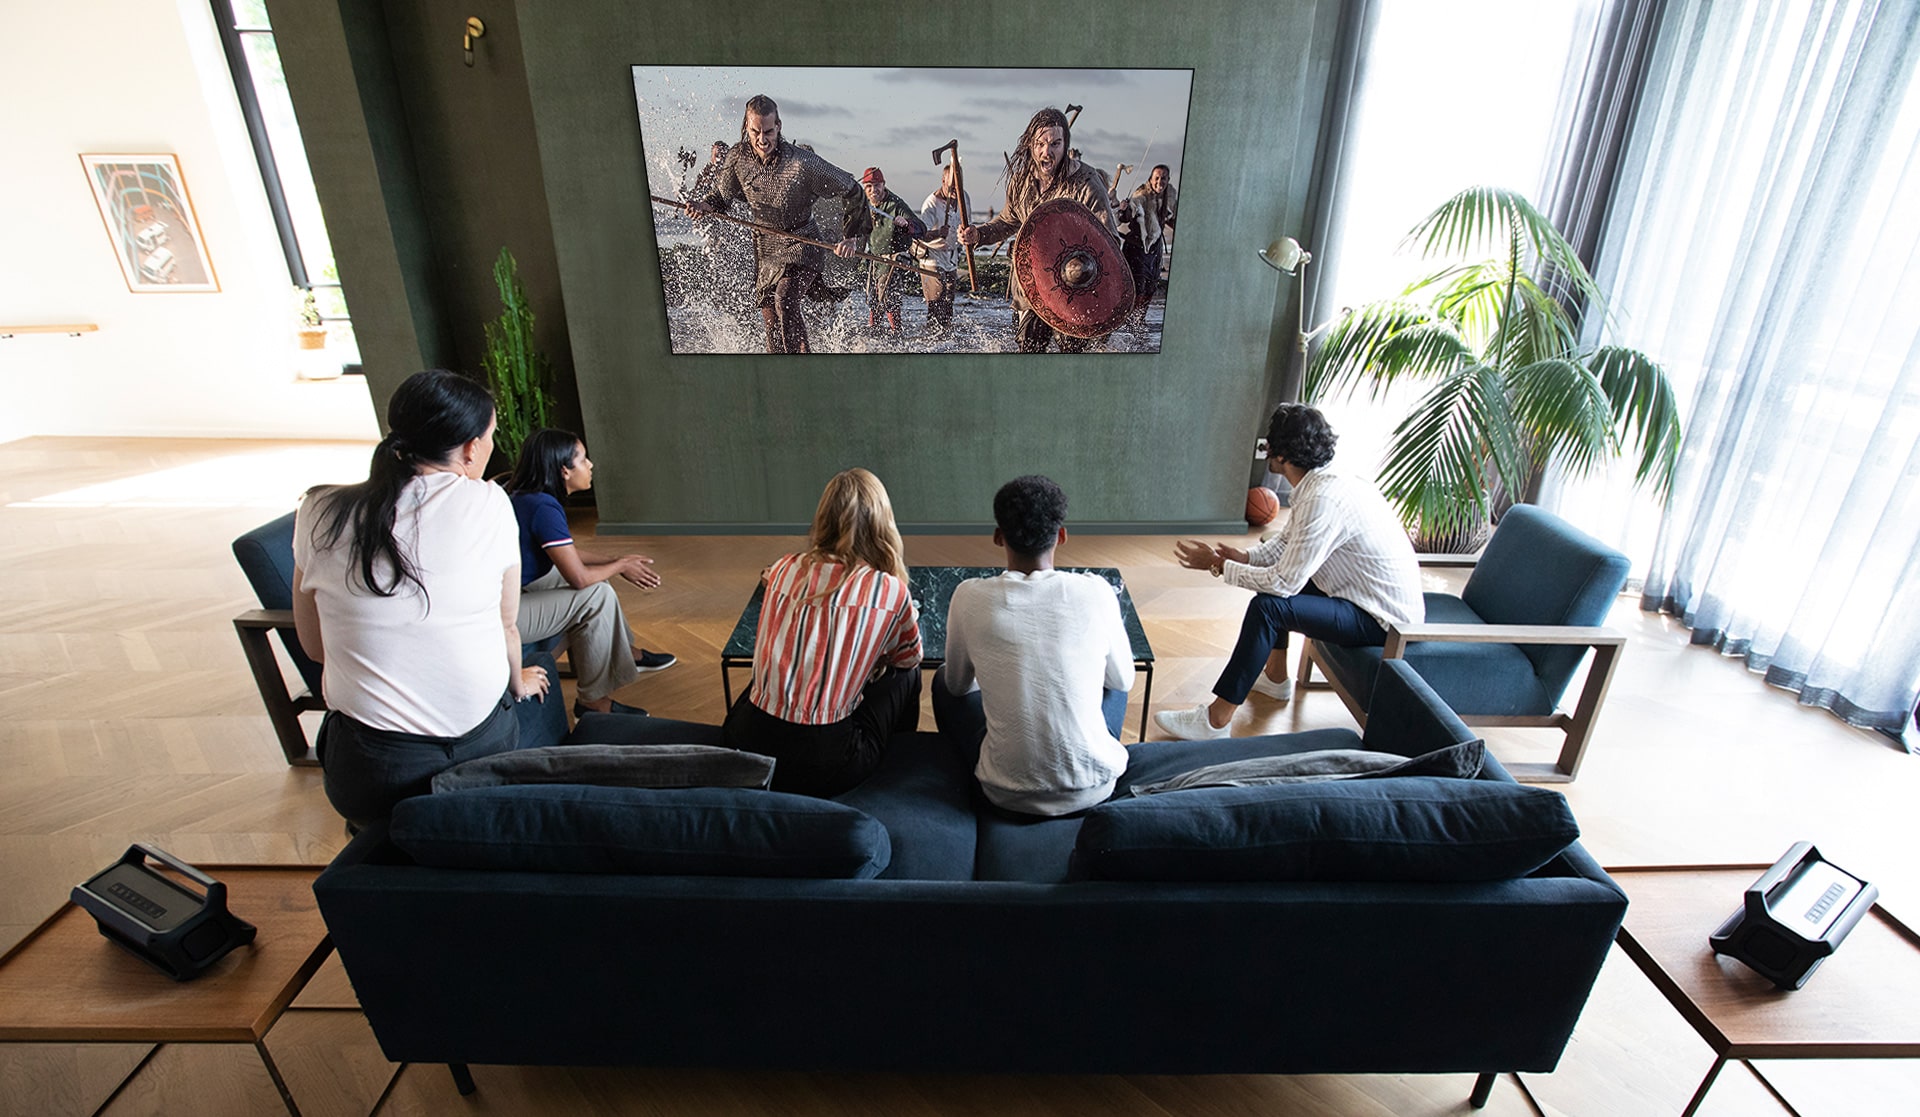 A group of friends watching a war movie on TV in the living room with 2 same Bluetooth speakers at rear speaker position